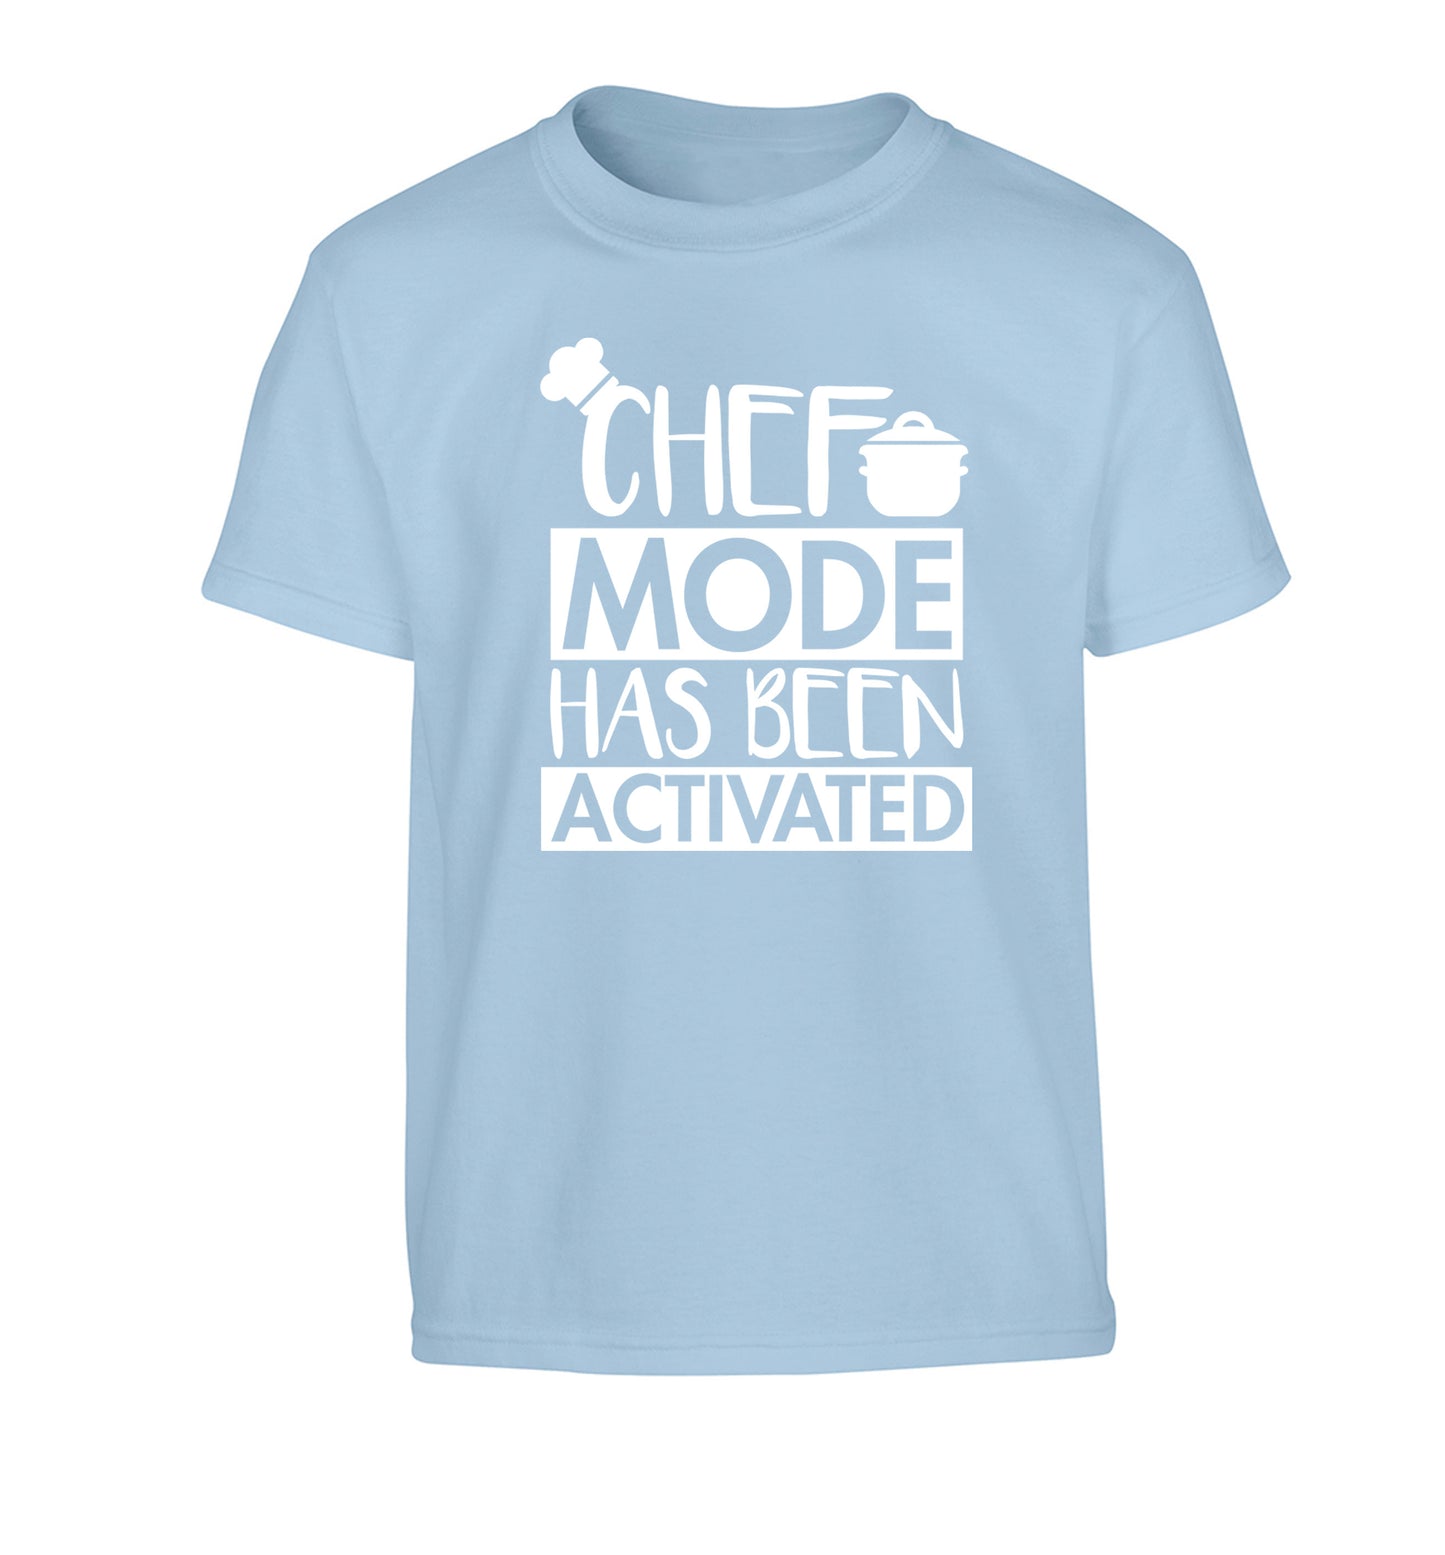 Chef mode has been activated Children's light blue Tshirt 12-14 Years